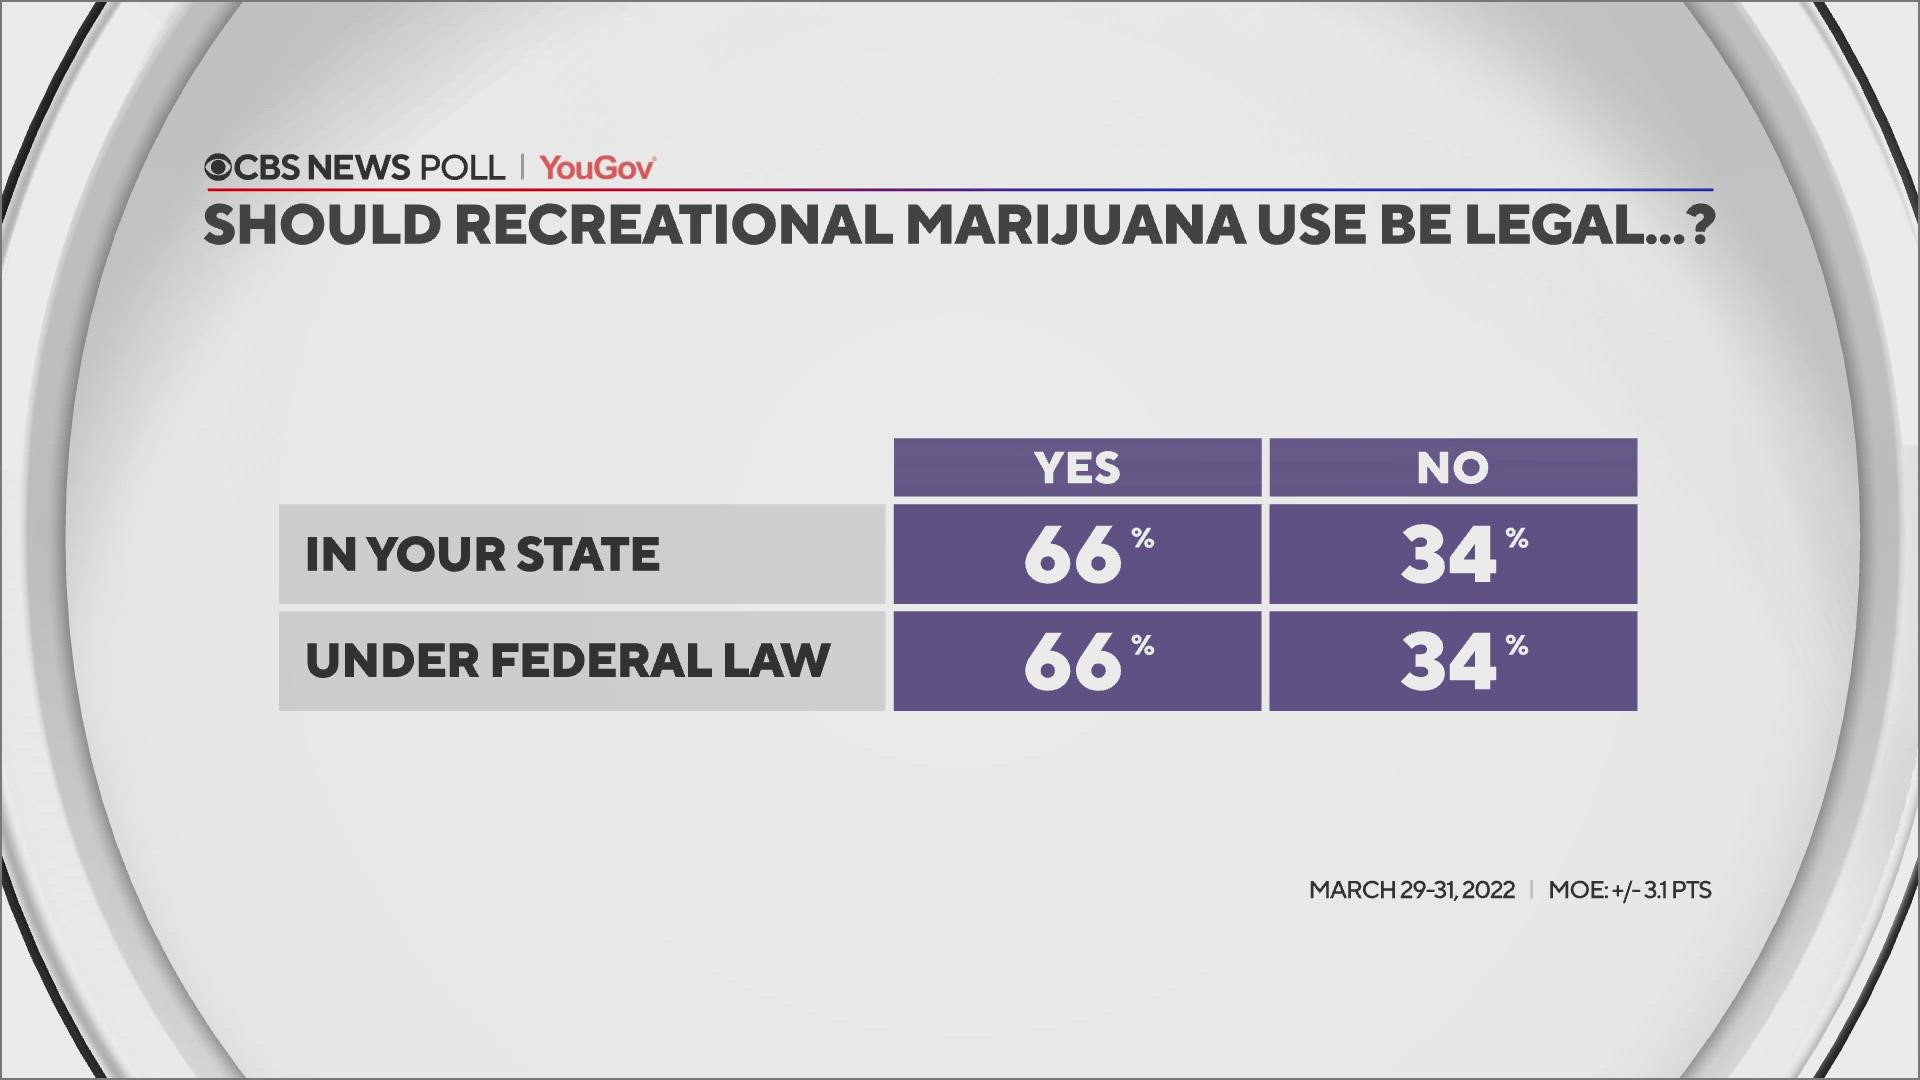 Recreational marijuana use remains illegal at the federal level. The House of Representatives recently passed a bill to federally decriminalize marijuana.